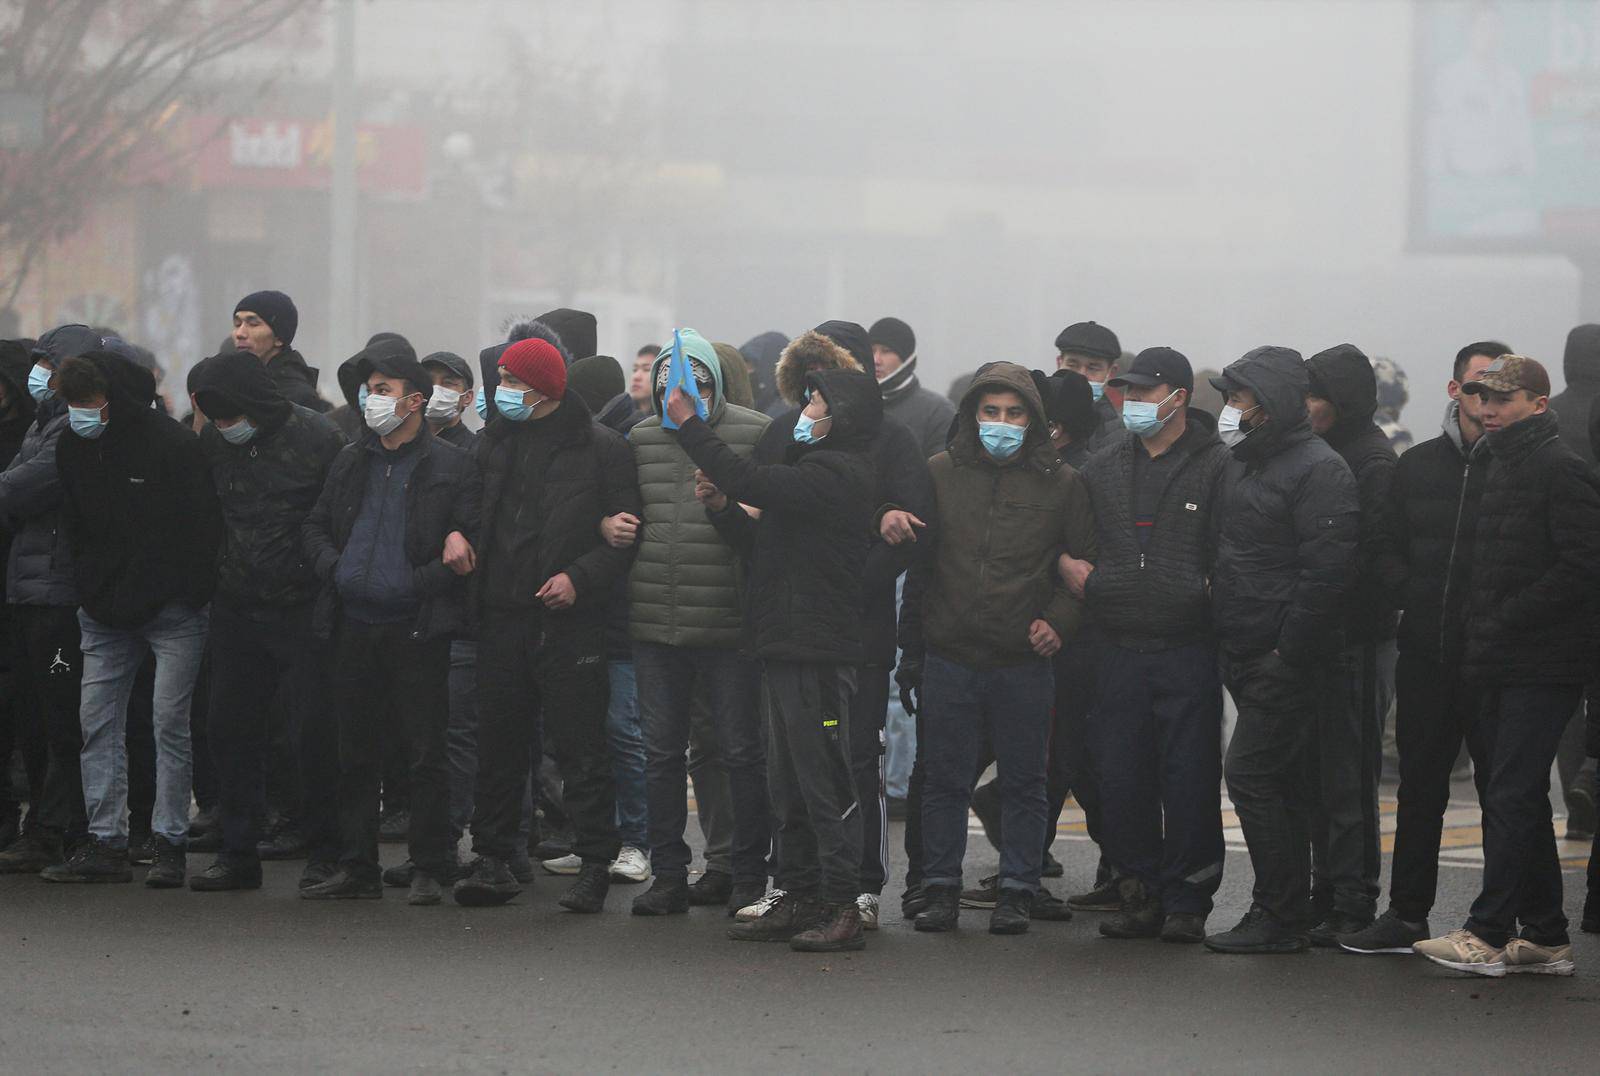 Demonstrators take part in a protest triggered by fuel price increase in Almaty